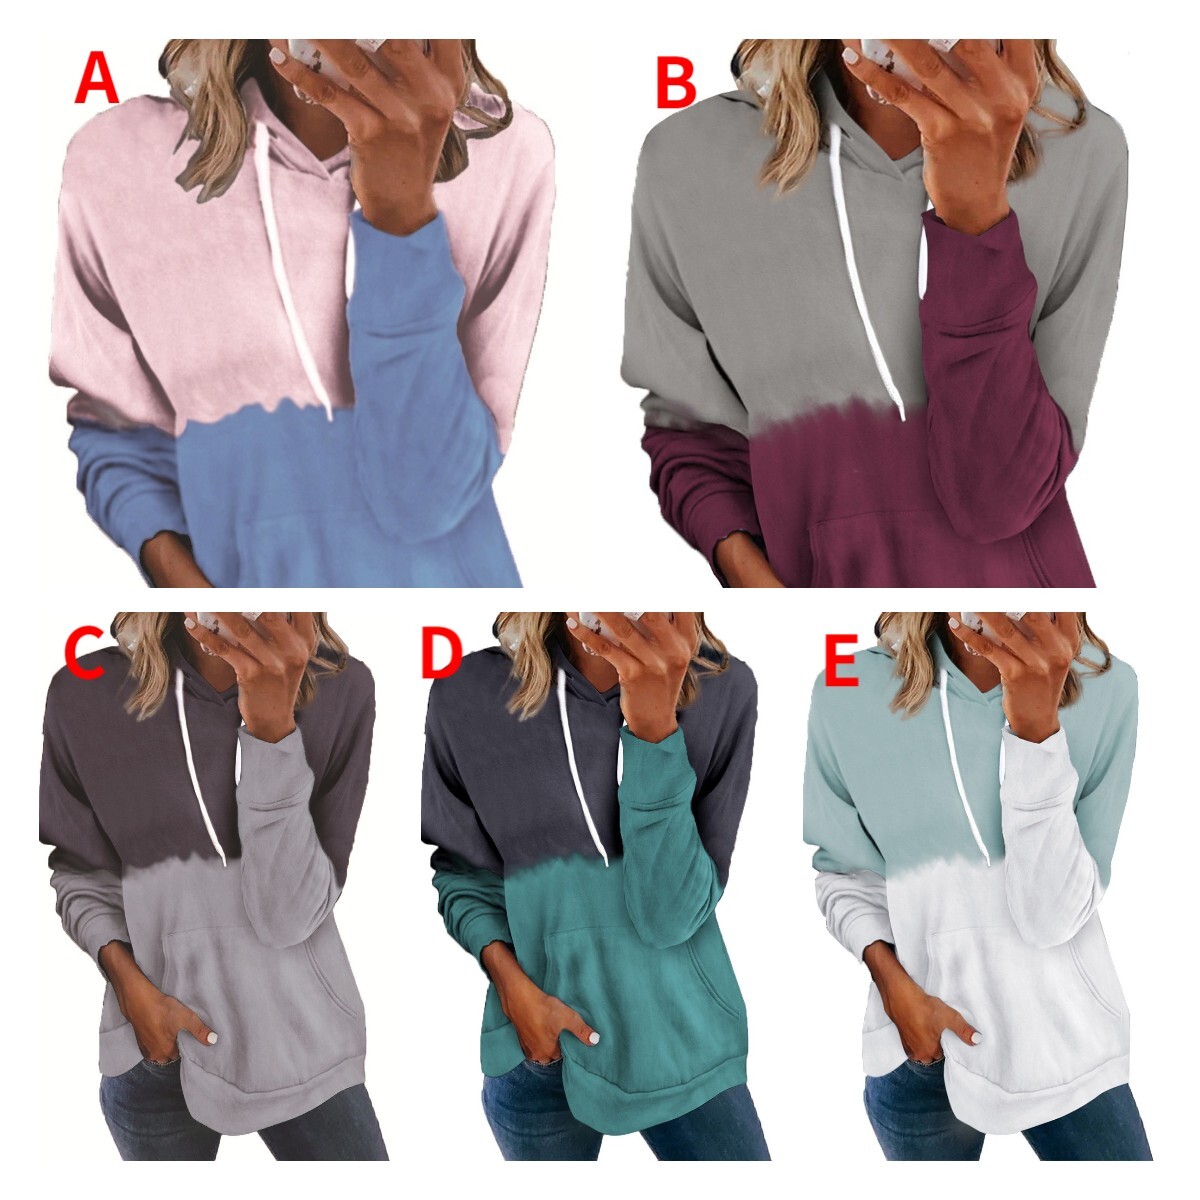 2021 Contrast Color Hoodie Women's Loose Casual Long Sleeve Bottomed Shirt C03667